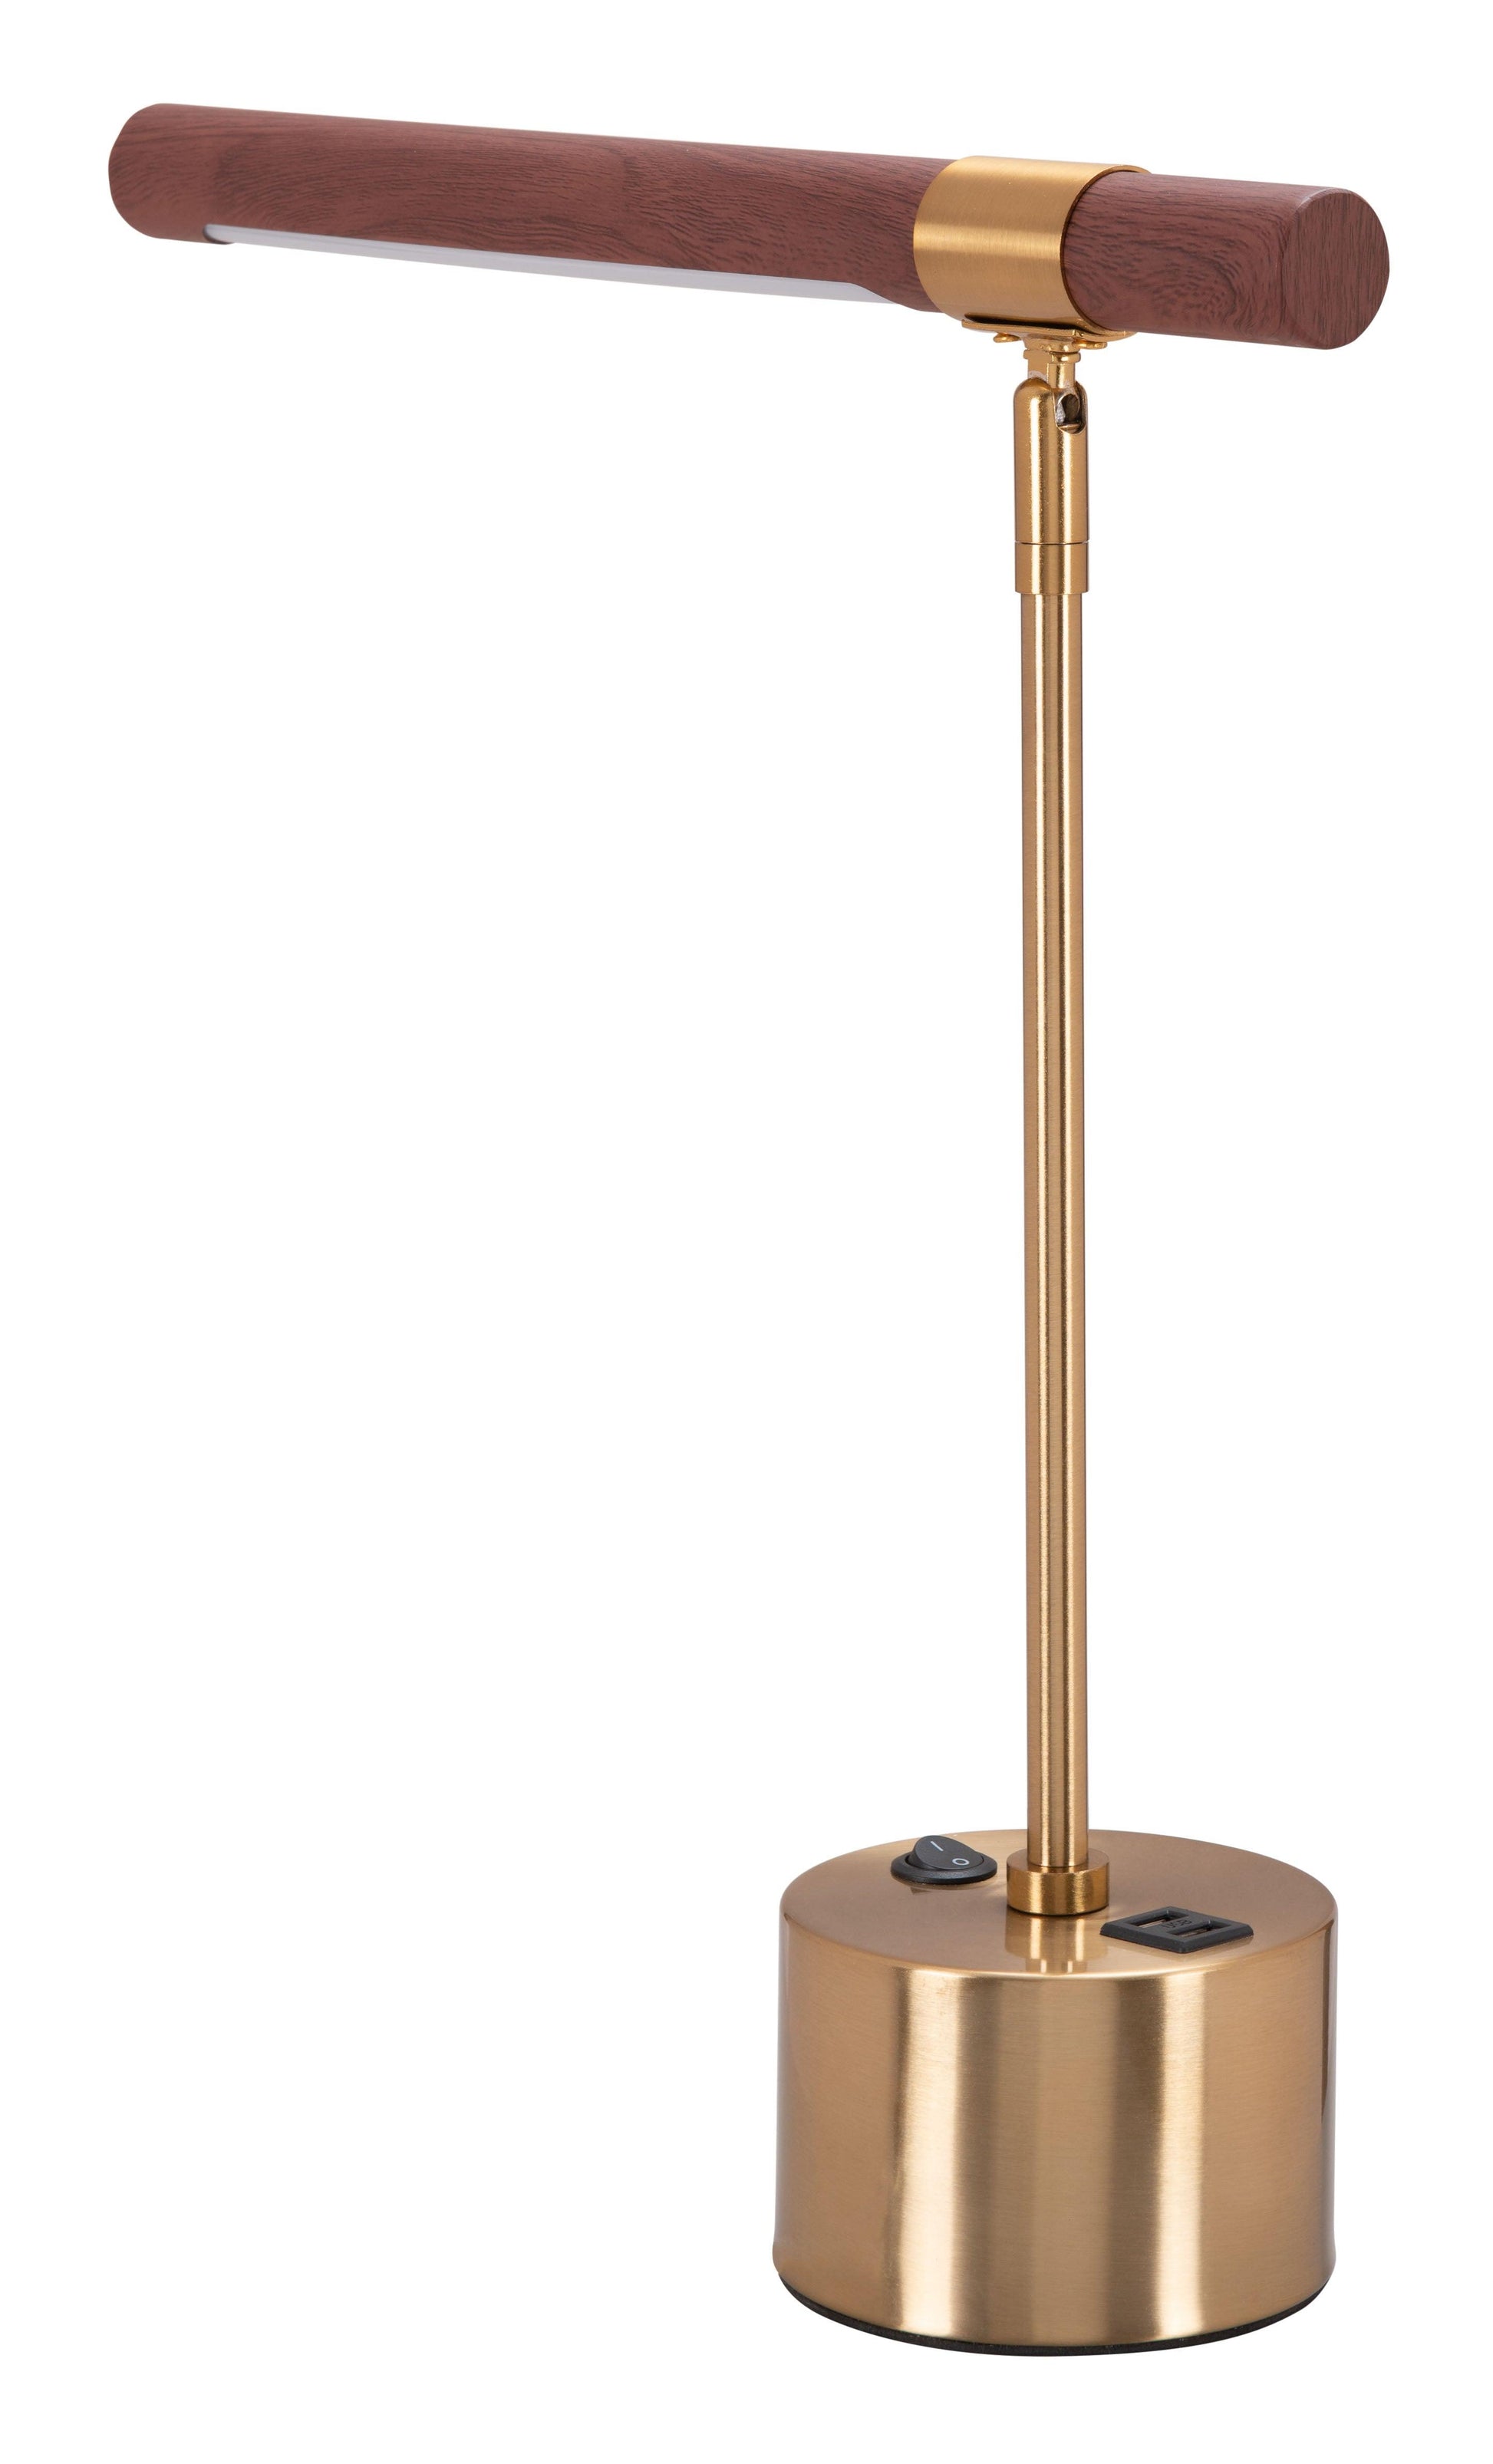 Kippy Table Lamp Brown & Brass - Sideboards and Things Accents_Brass, Brand_Zuo Modern, Color_Brown, Depth_0-10, Features_Adjustable, Finish_Hand Painted, Finish_Polished, Height_10-20, Materials_Metal, Metal Type_Steel, Product Type_Table Lamp, Width_10-20